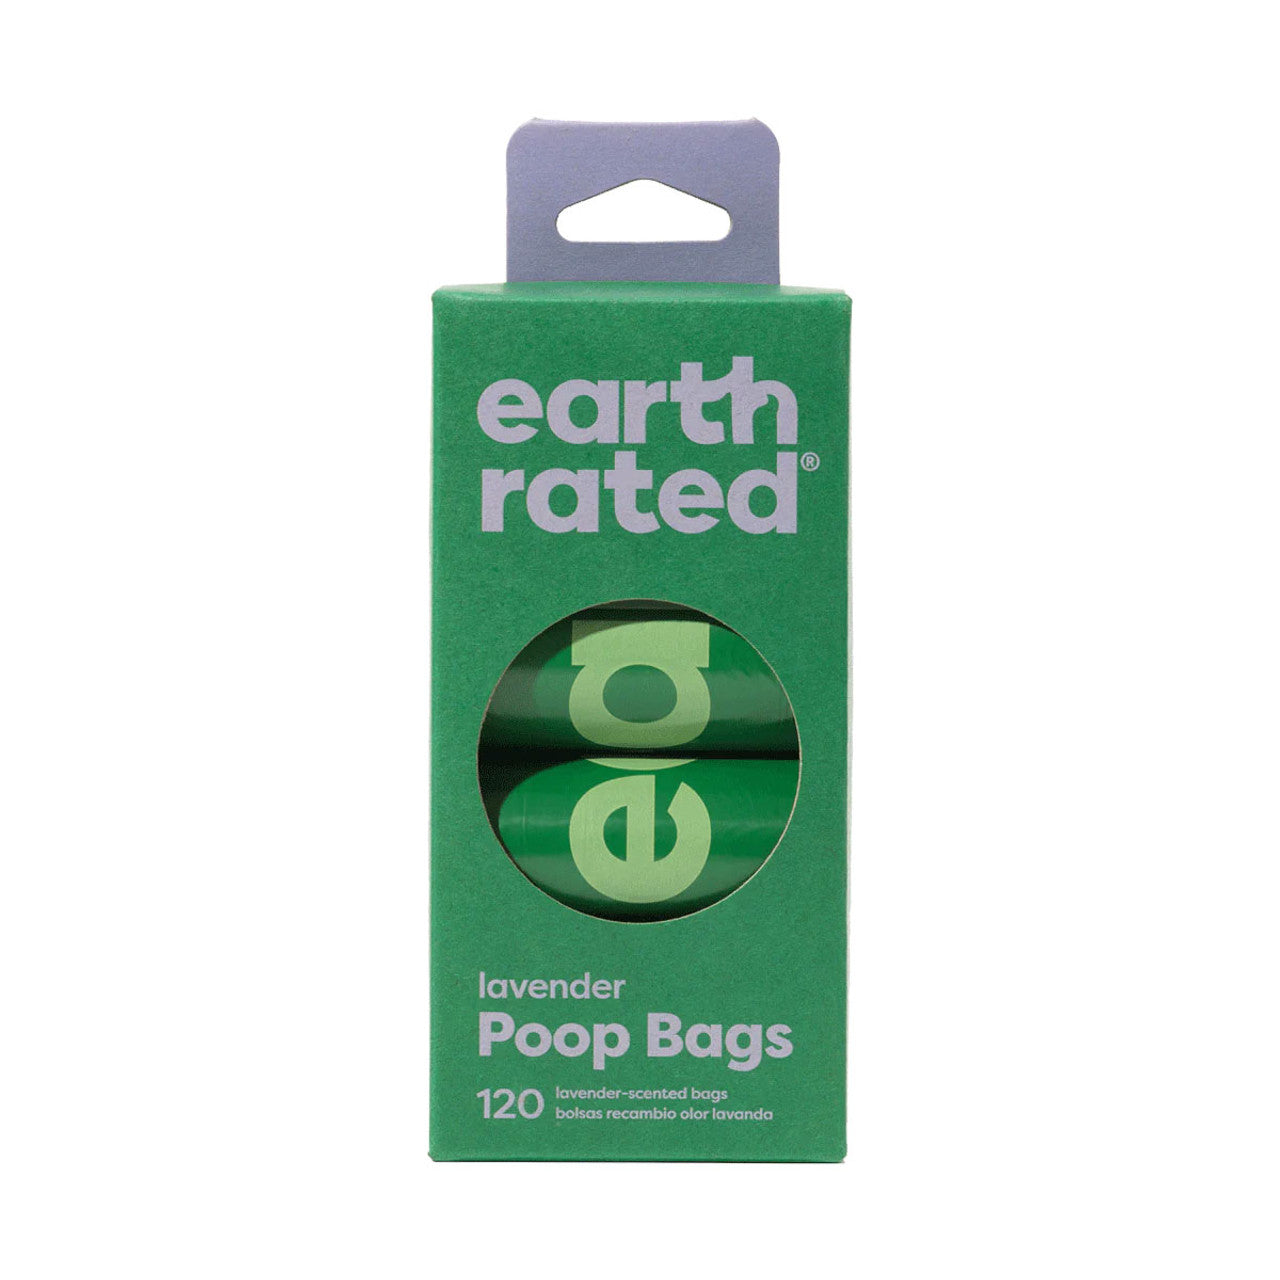 Earth Rated Poop Bags 120 Bags on 8 x 15 Refill Rolls Lavender Scented